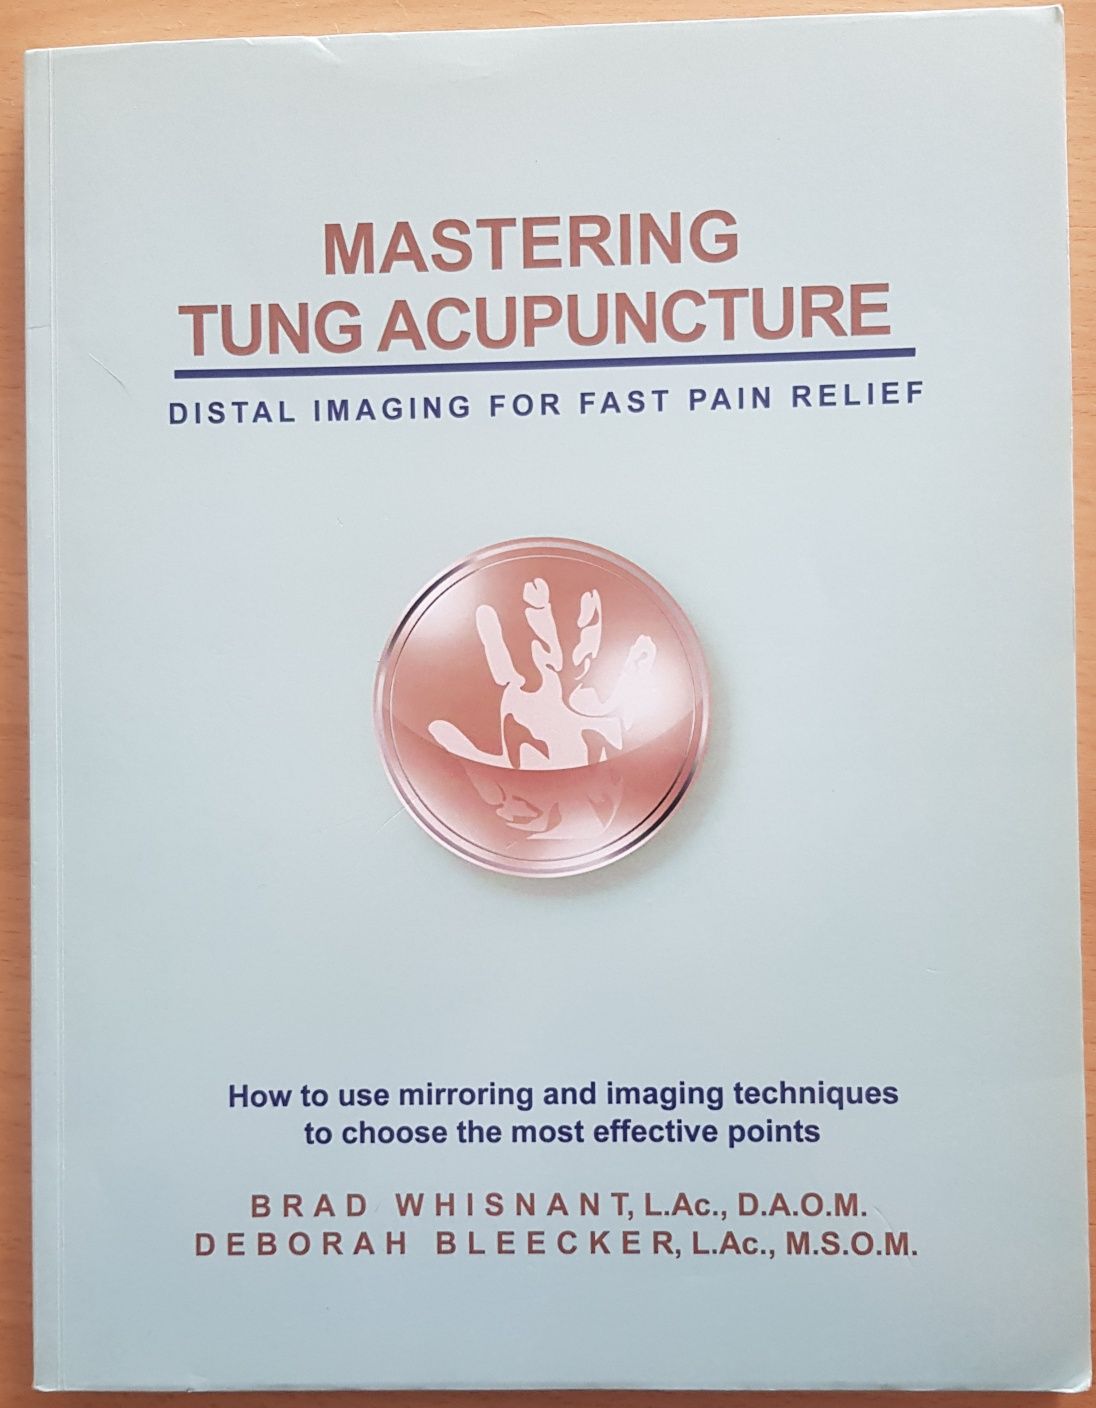 Vendo Livro Mastering Tung Acupunture - Distal Imaging For Pain Relief